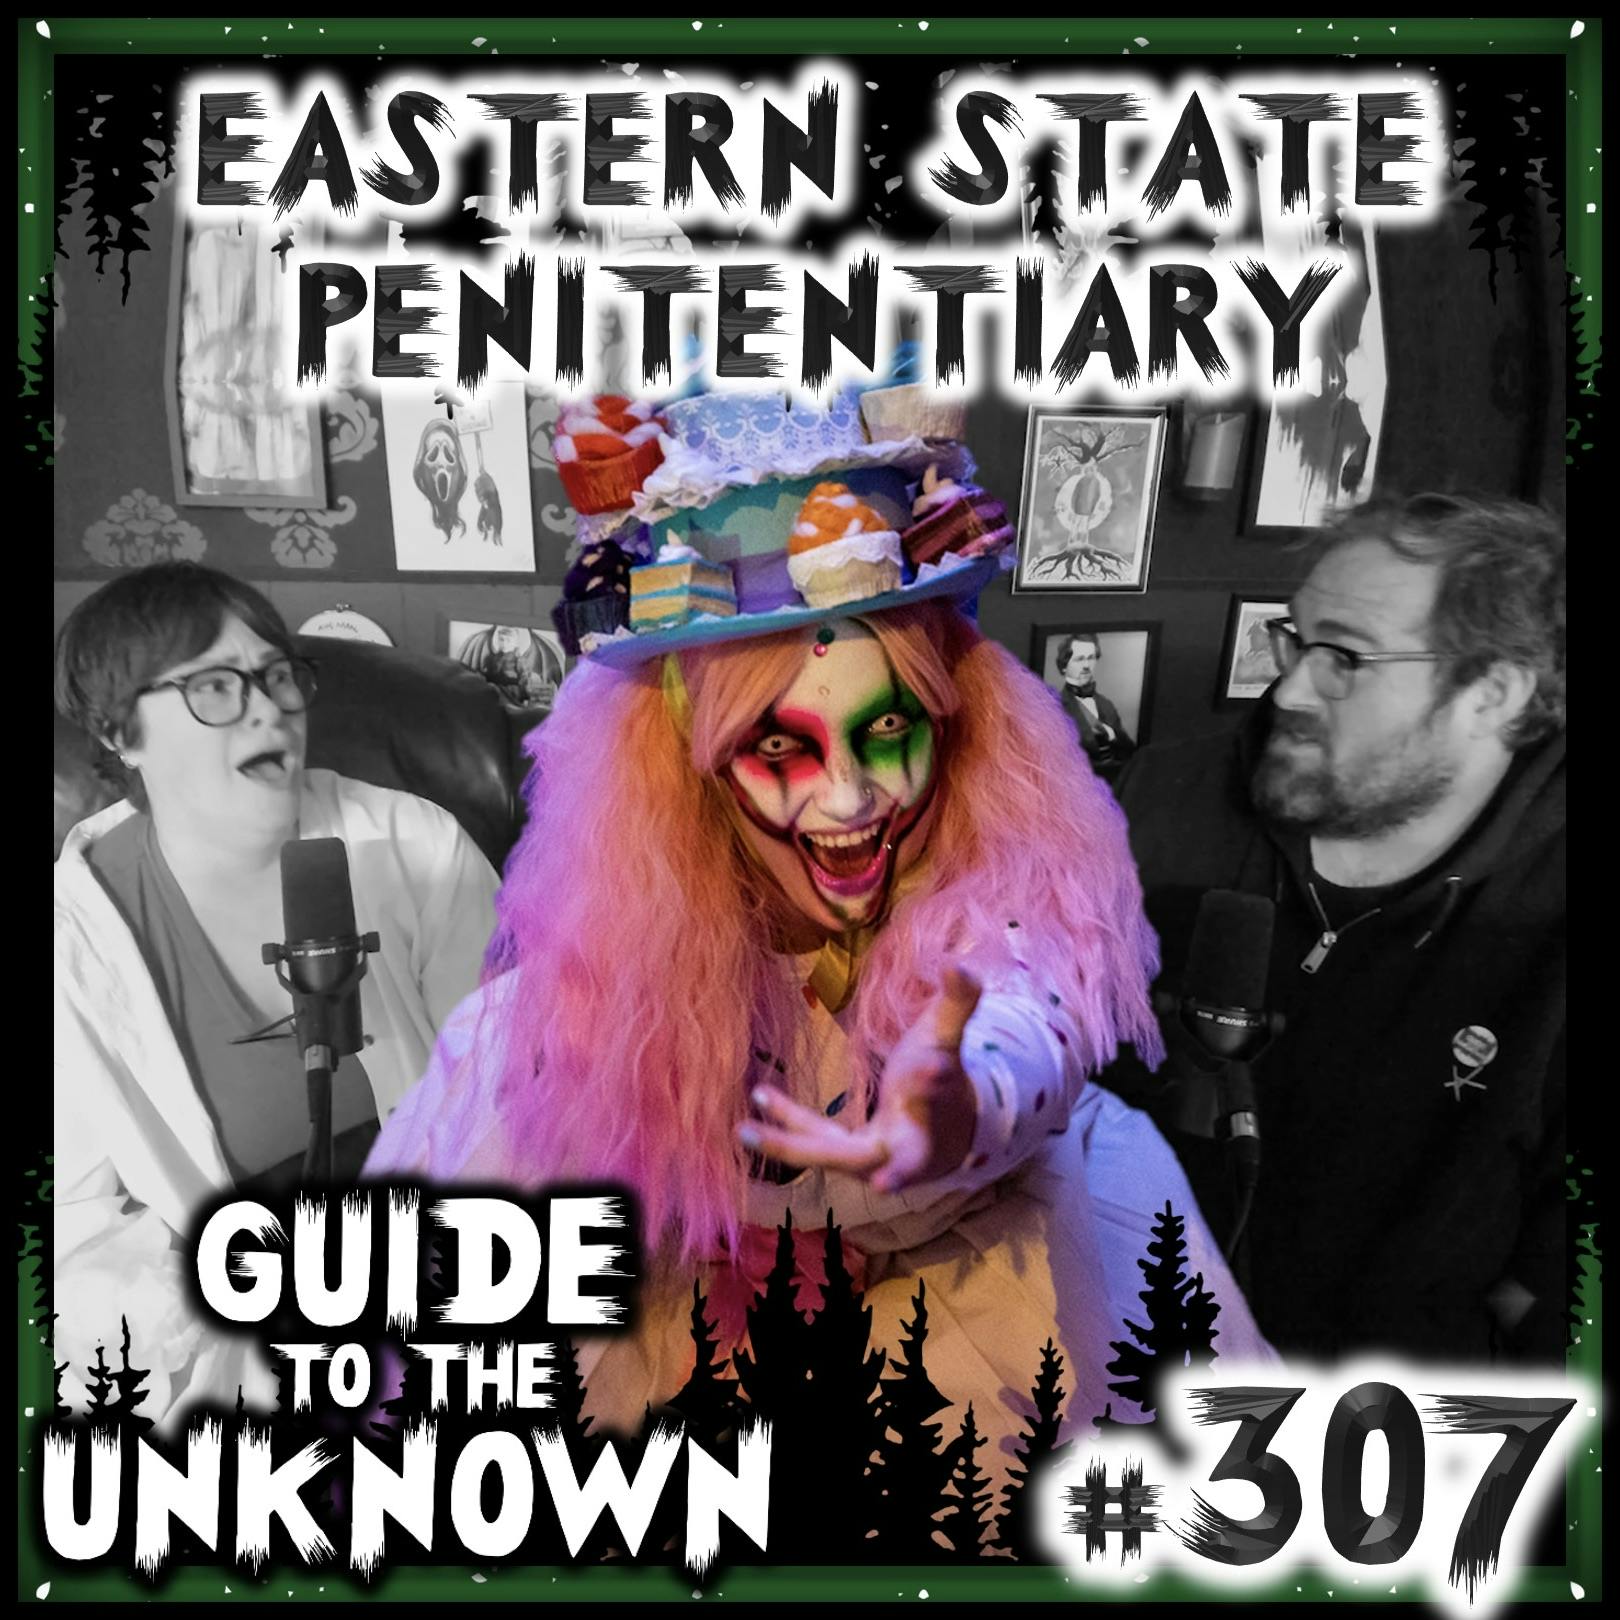 307: Eastern State Penitentiary